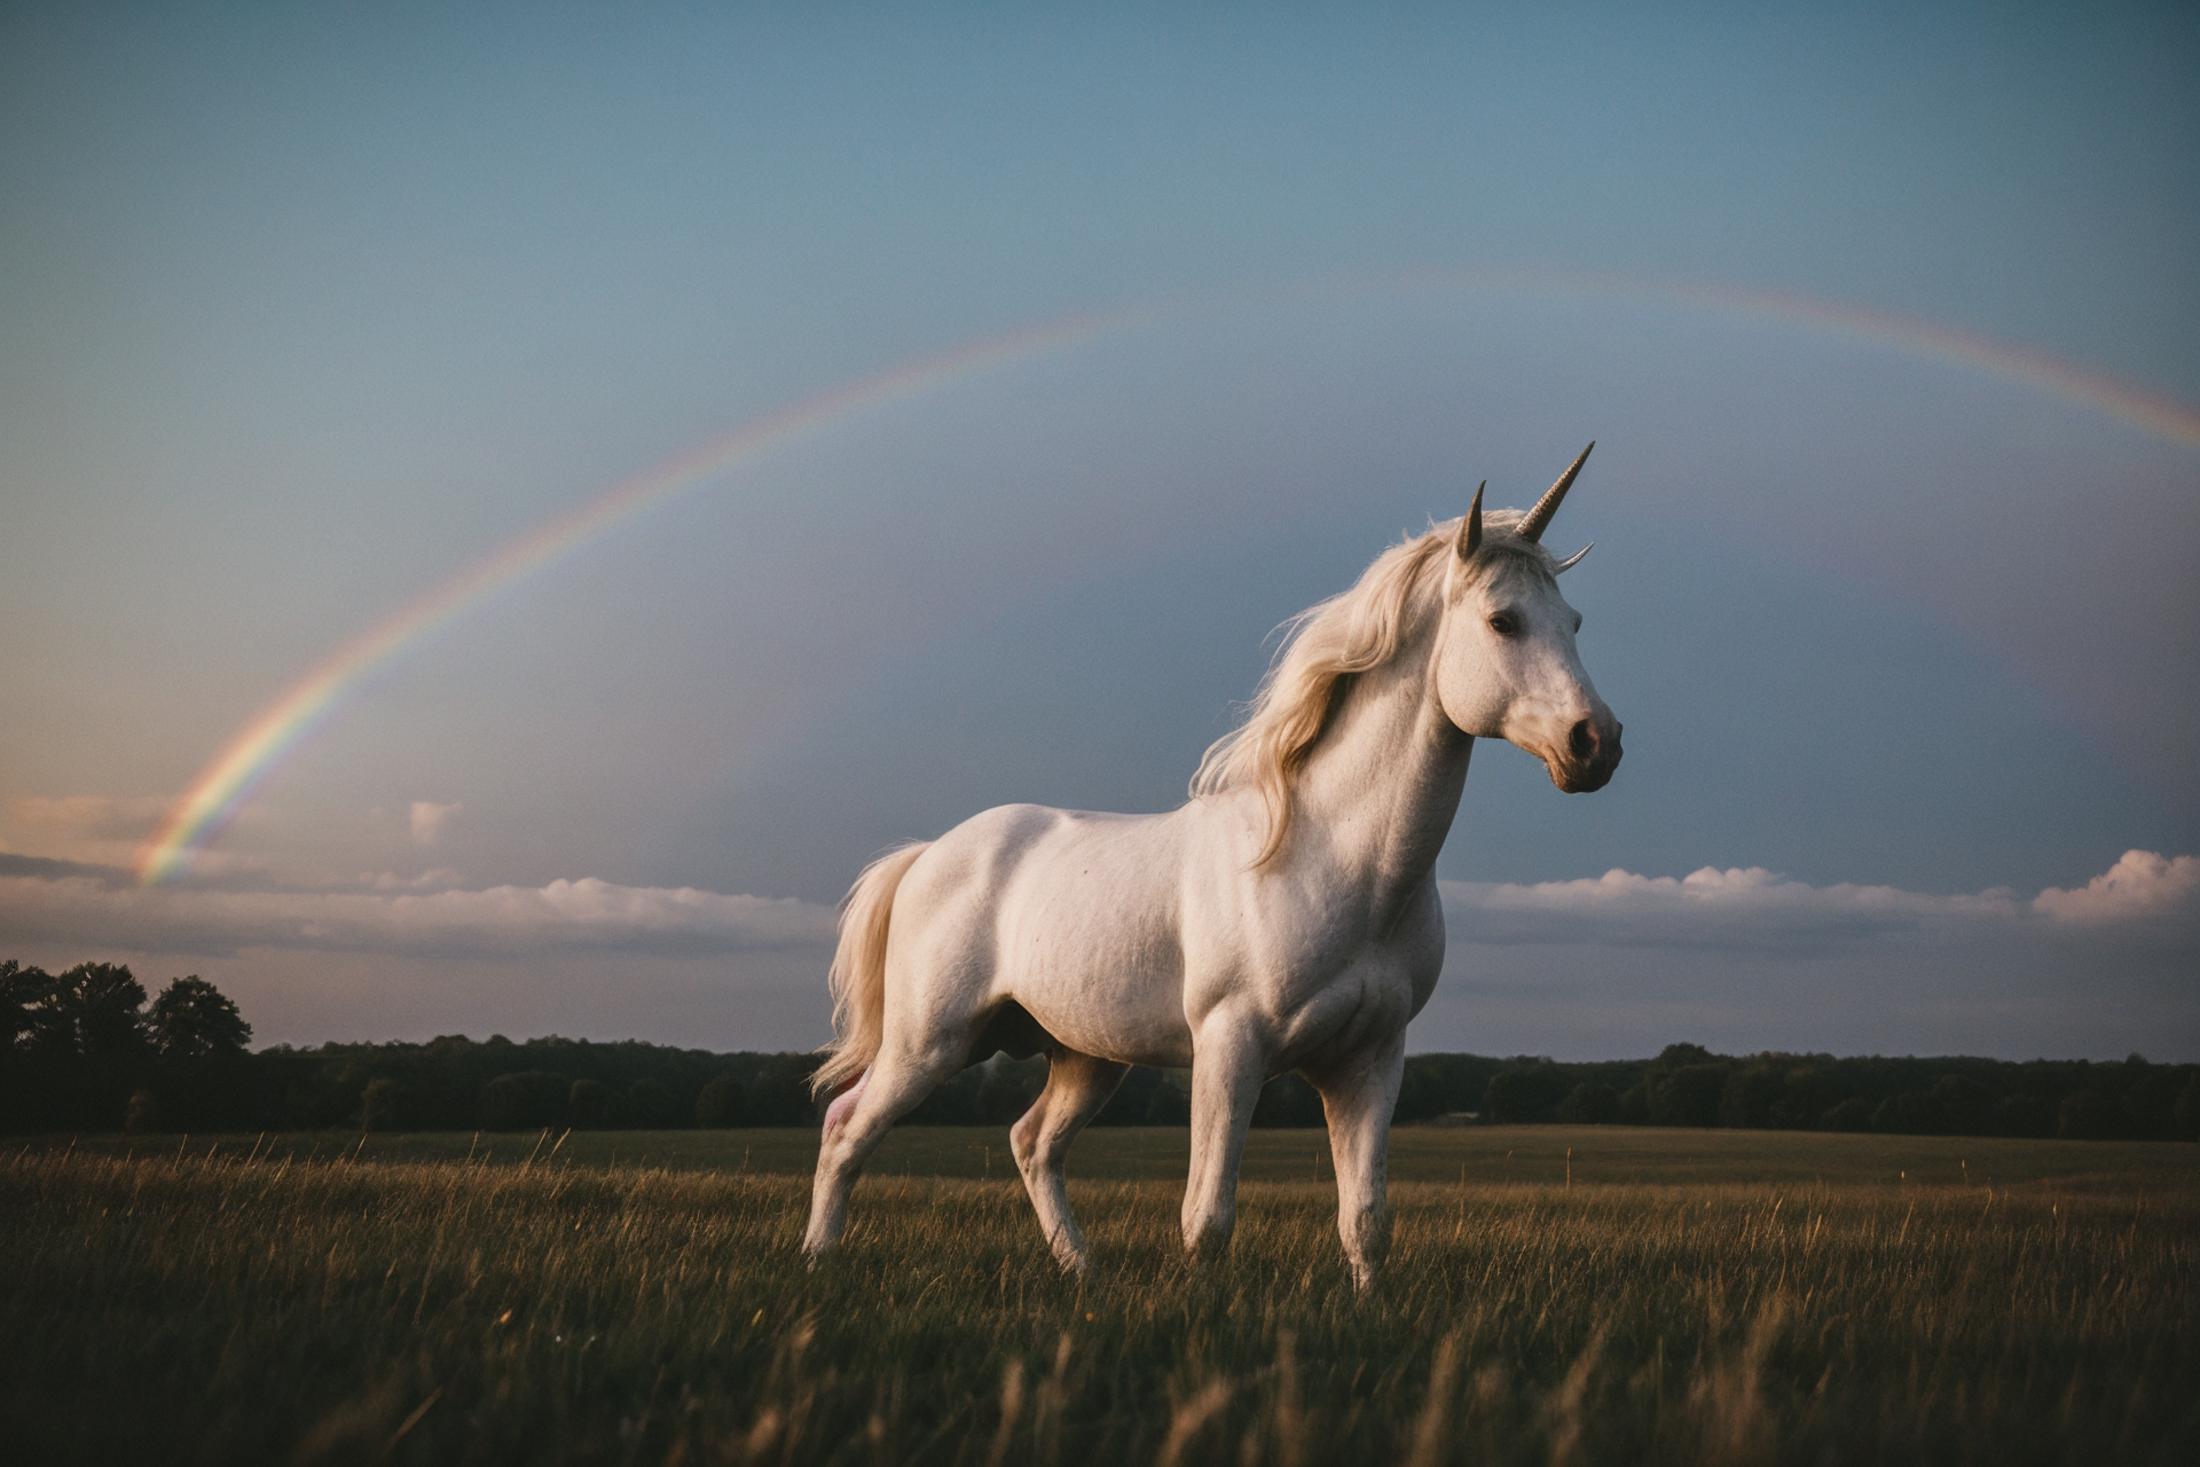 A white unicorn standing in a field with a rainbow in the background.